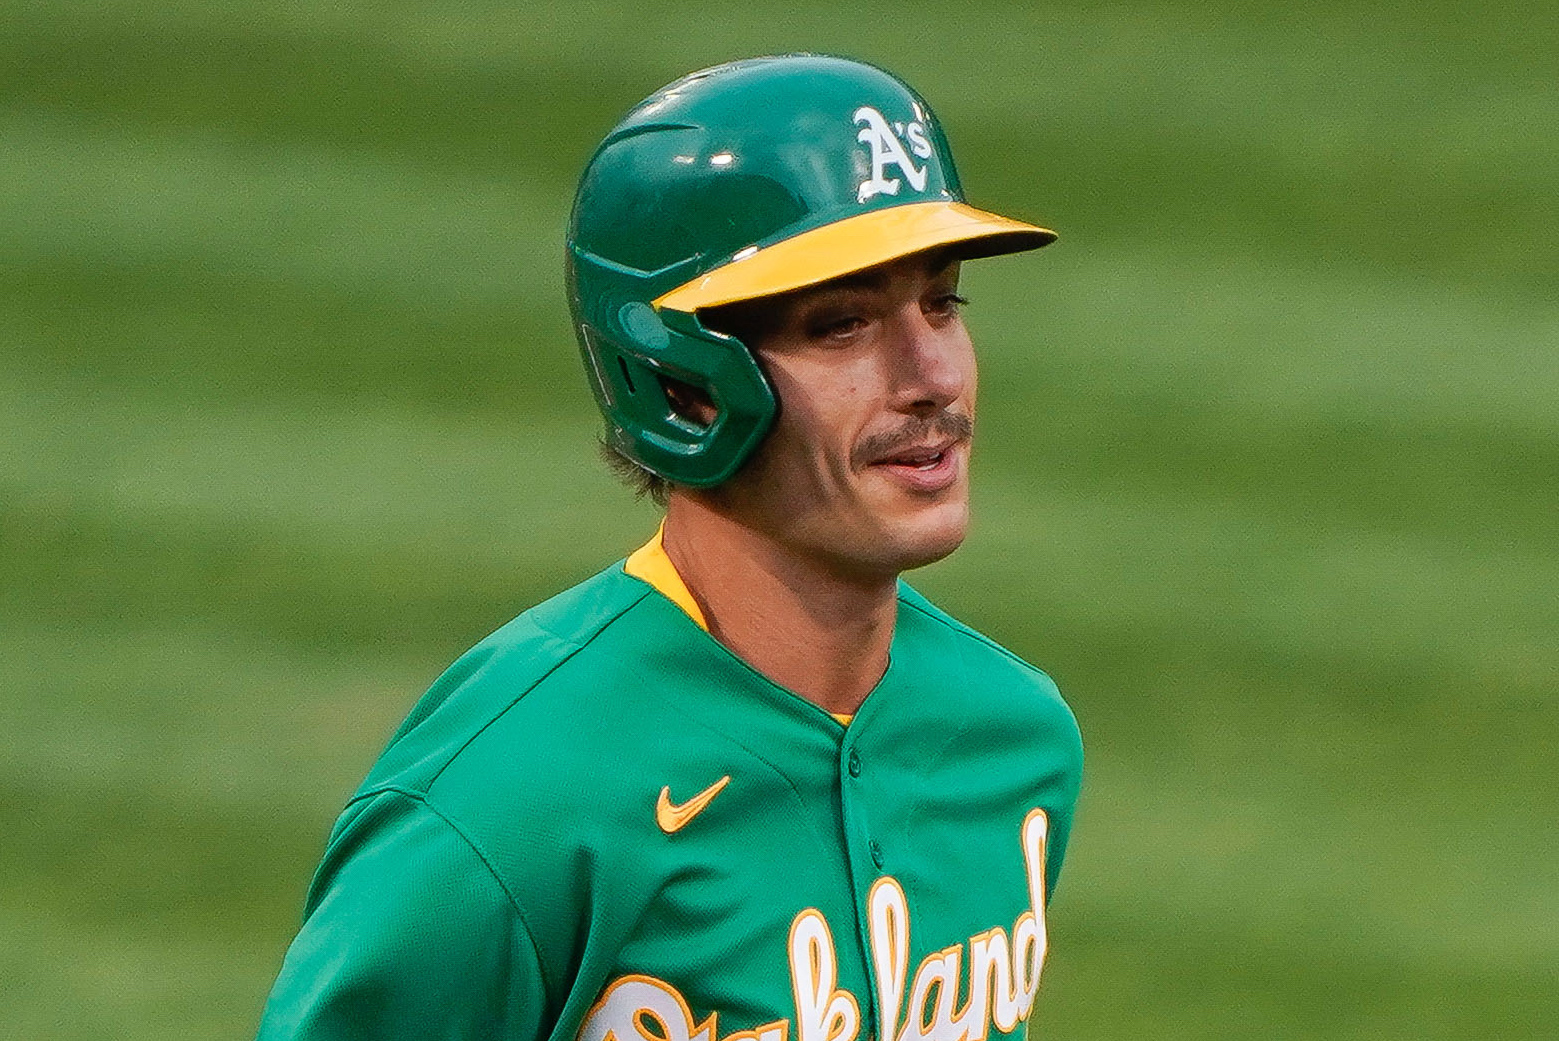 Brodie Brazil Olson has now hit THREE homers since debuting the mustache last night